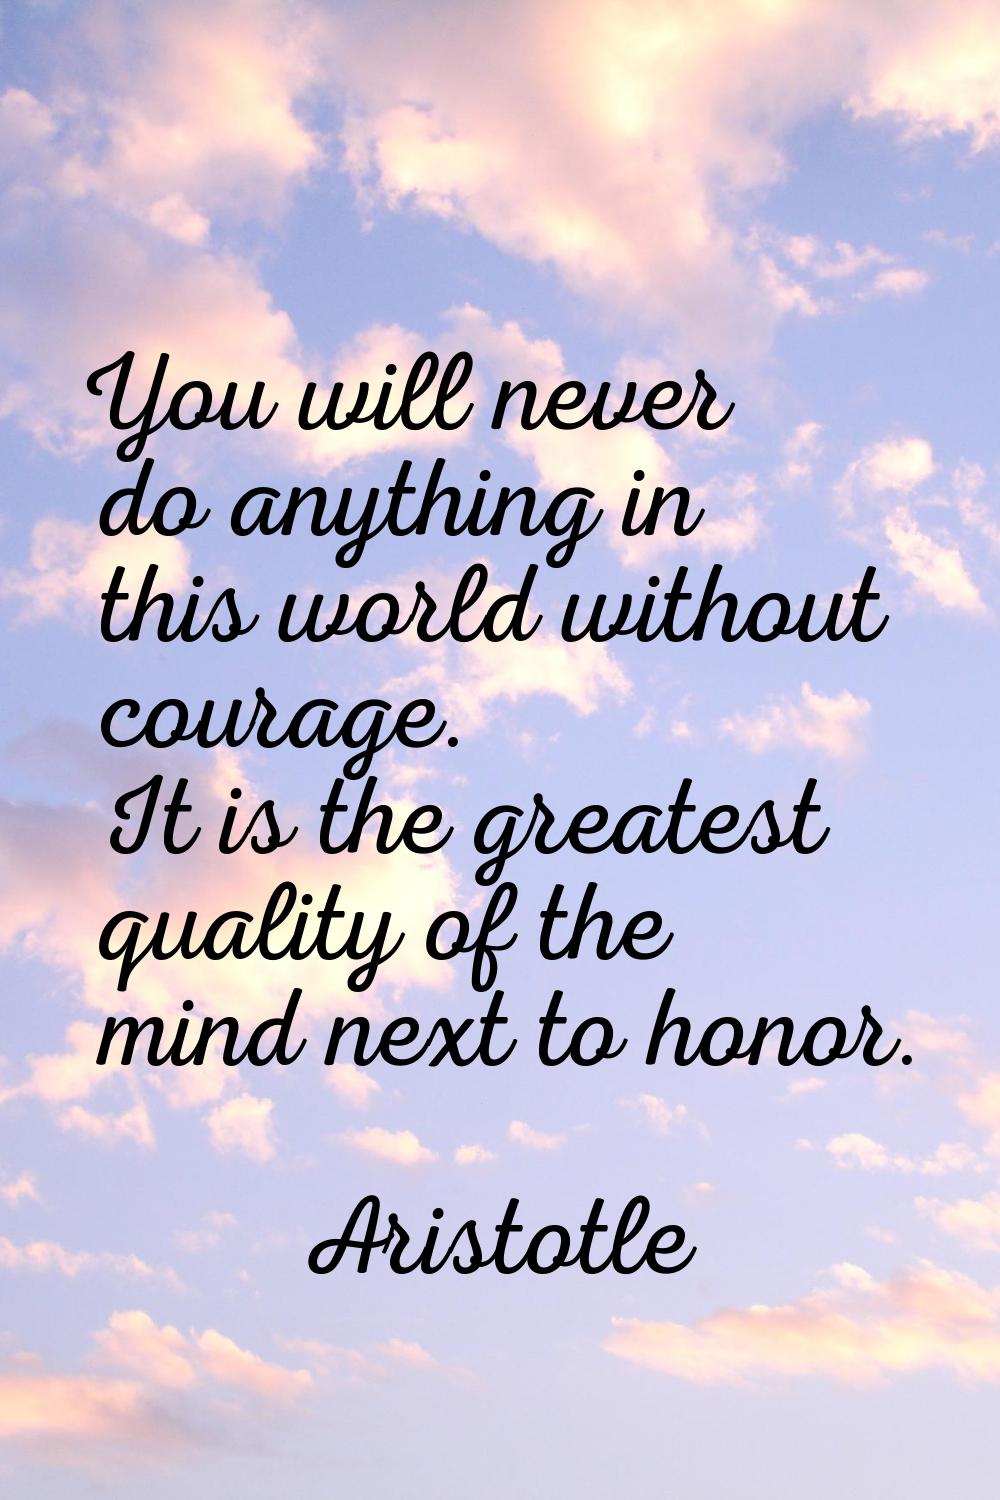 You will never do anything in this world without courage. It is the greatest quality of the mind ne